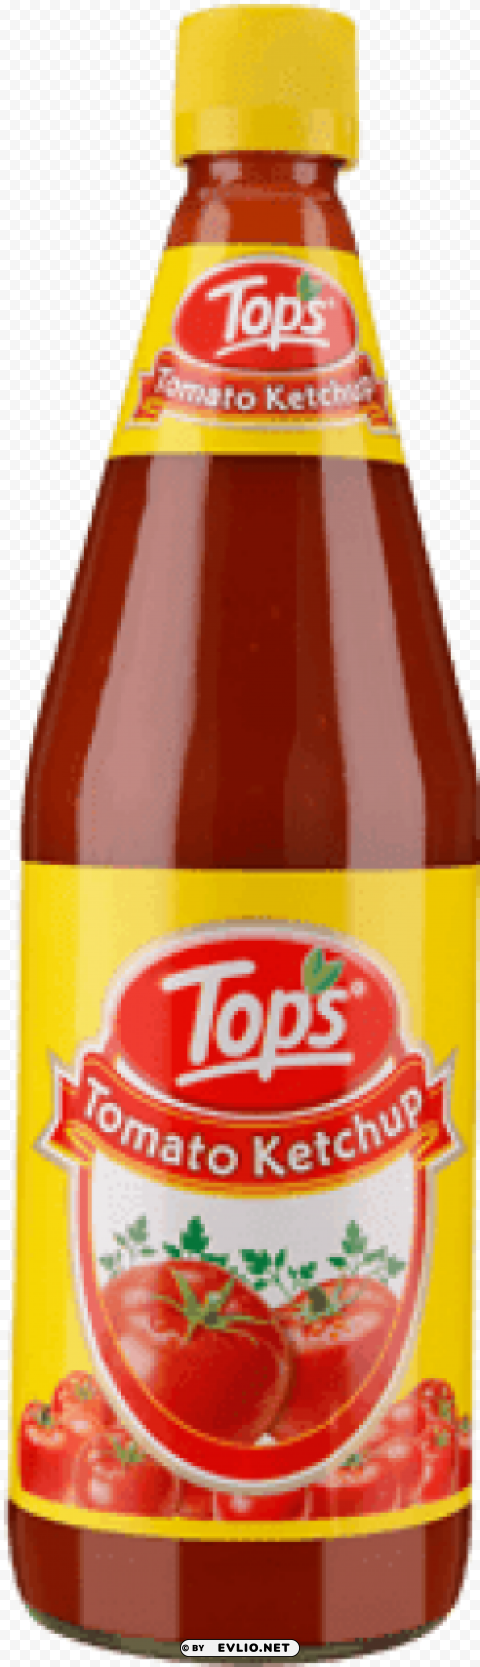 tops tomato ketchup Transparent PNG pictures complete compilation